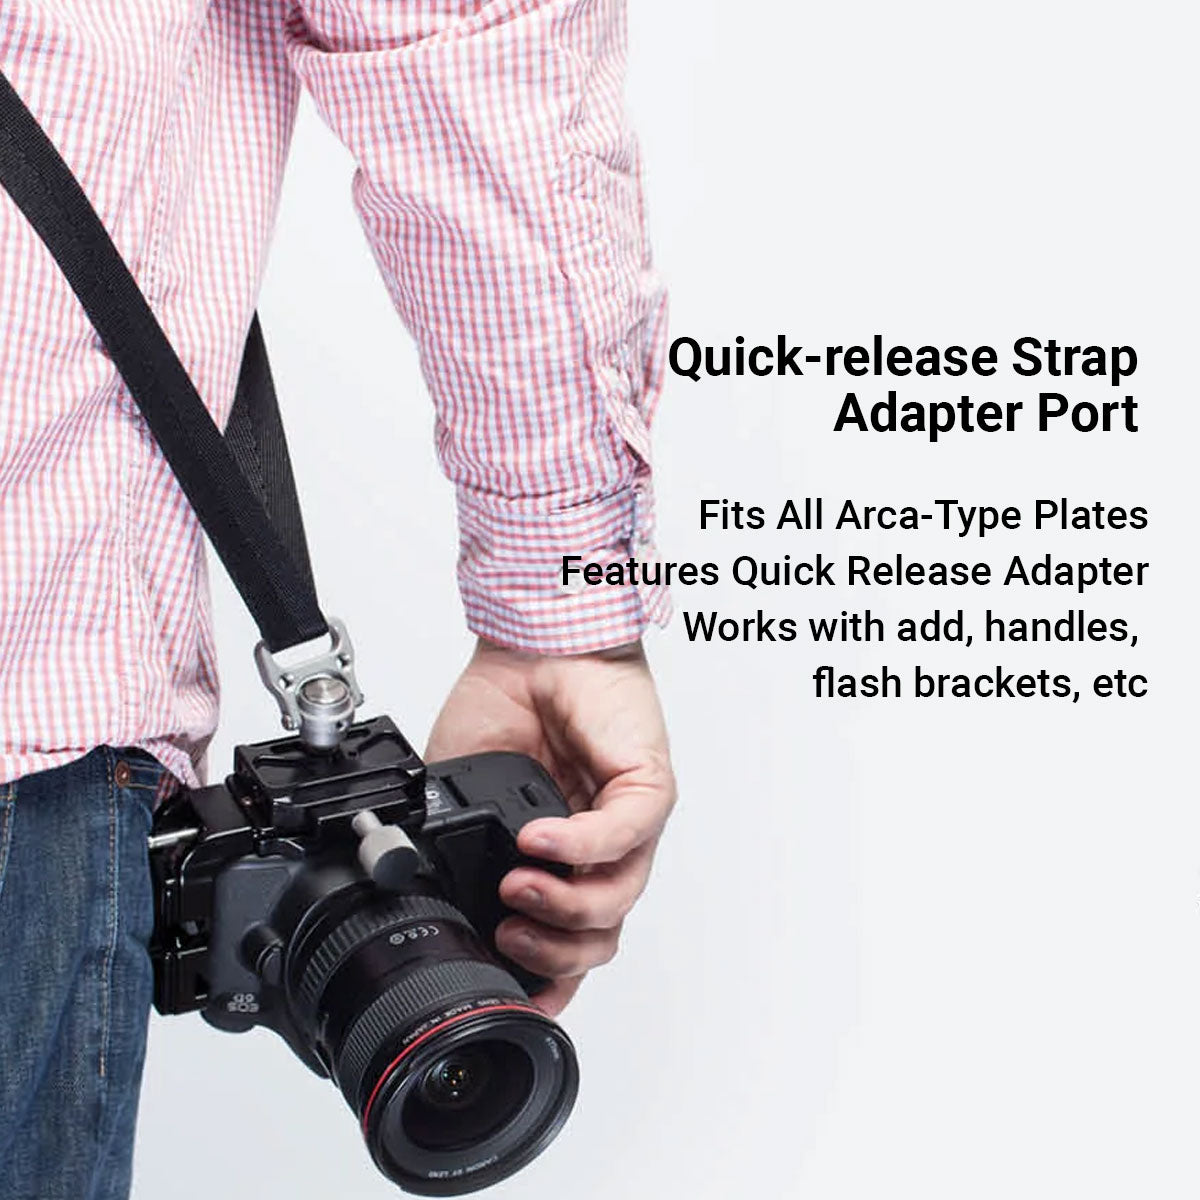 quick-release strap adapter port